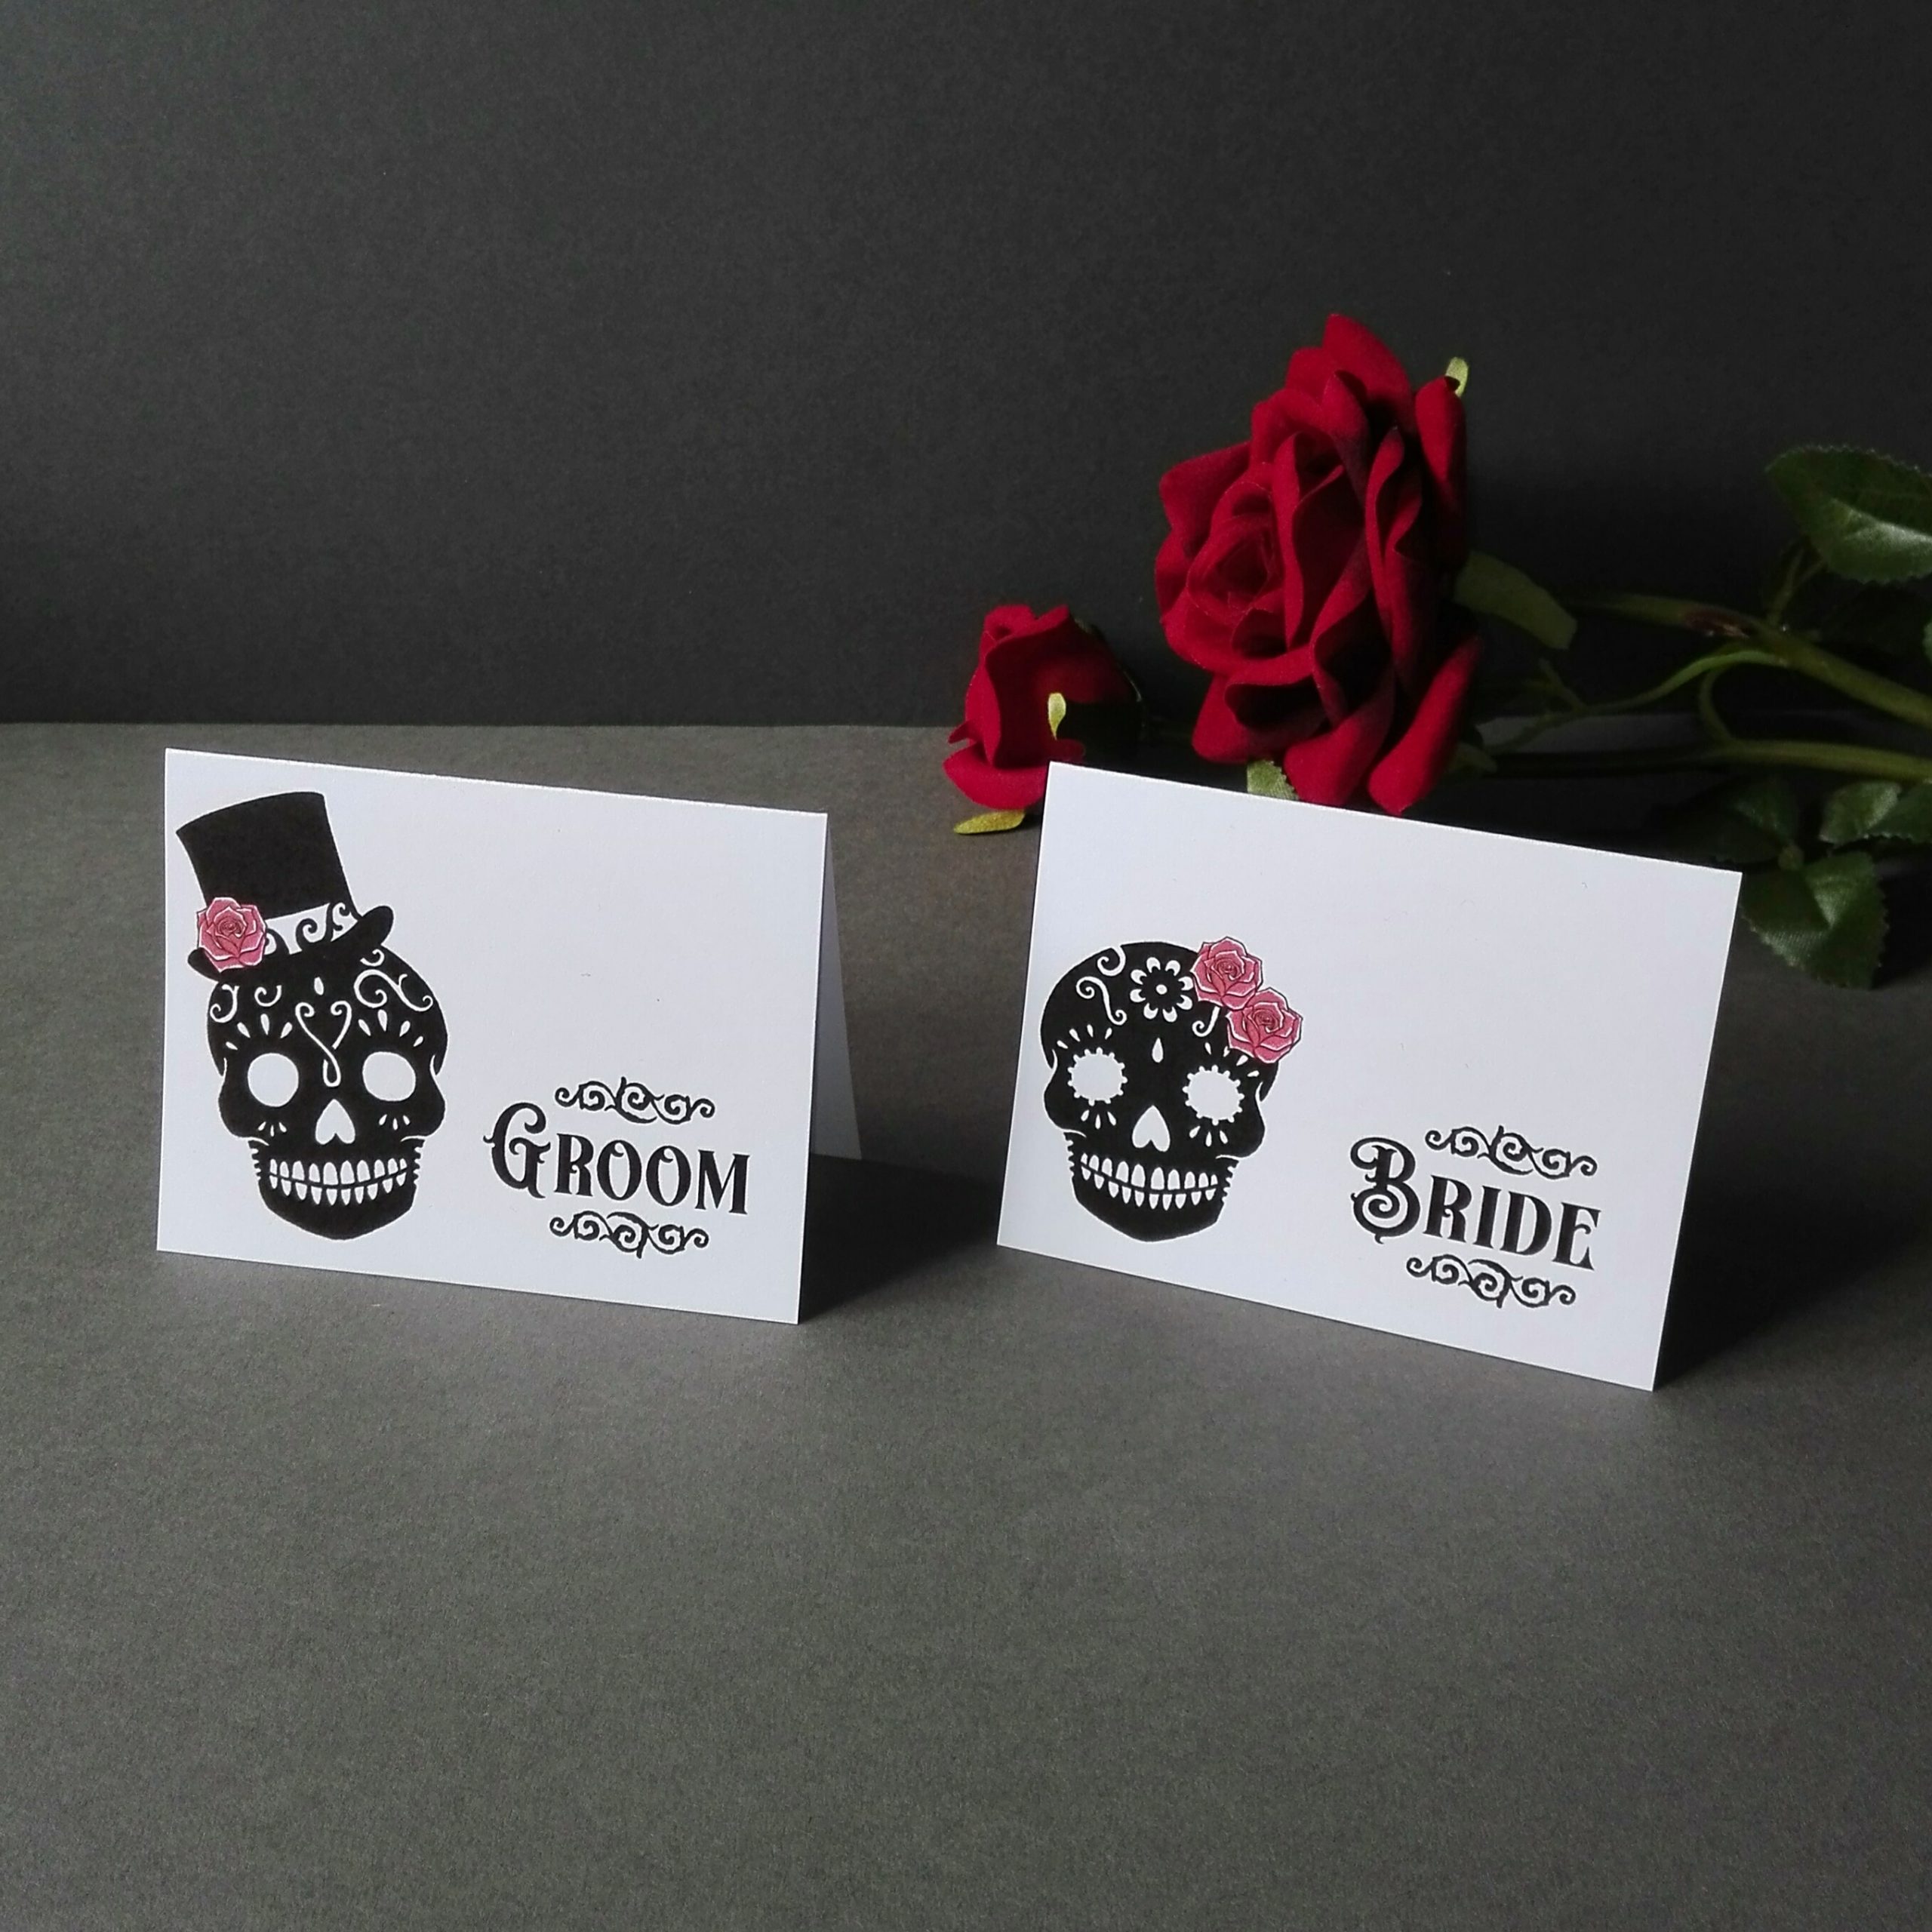 10 Red Sugar Skull Place Name Cards Rockabilly Tattoo Wedding Day of the Dead 